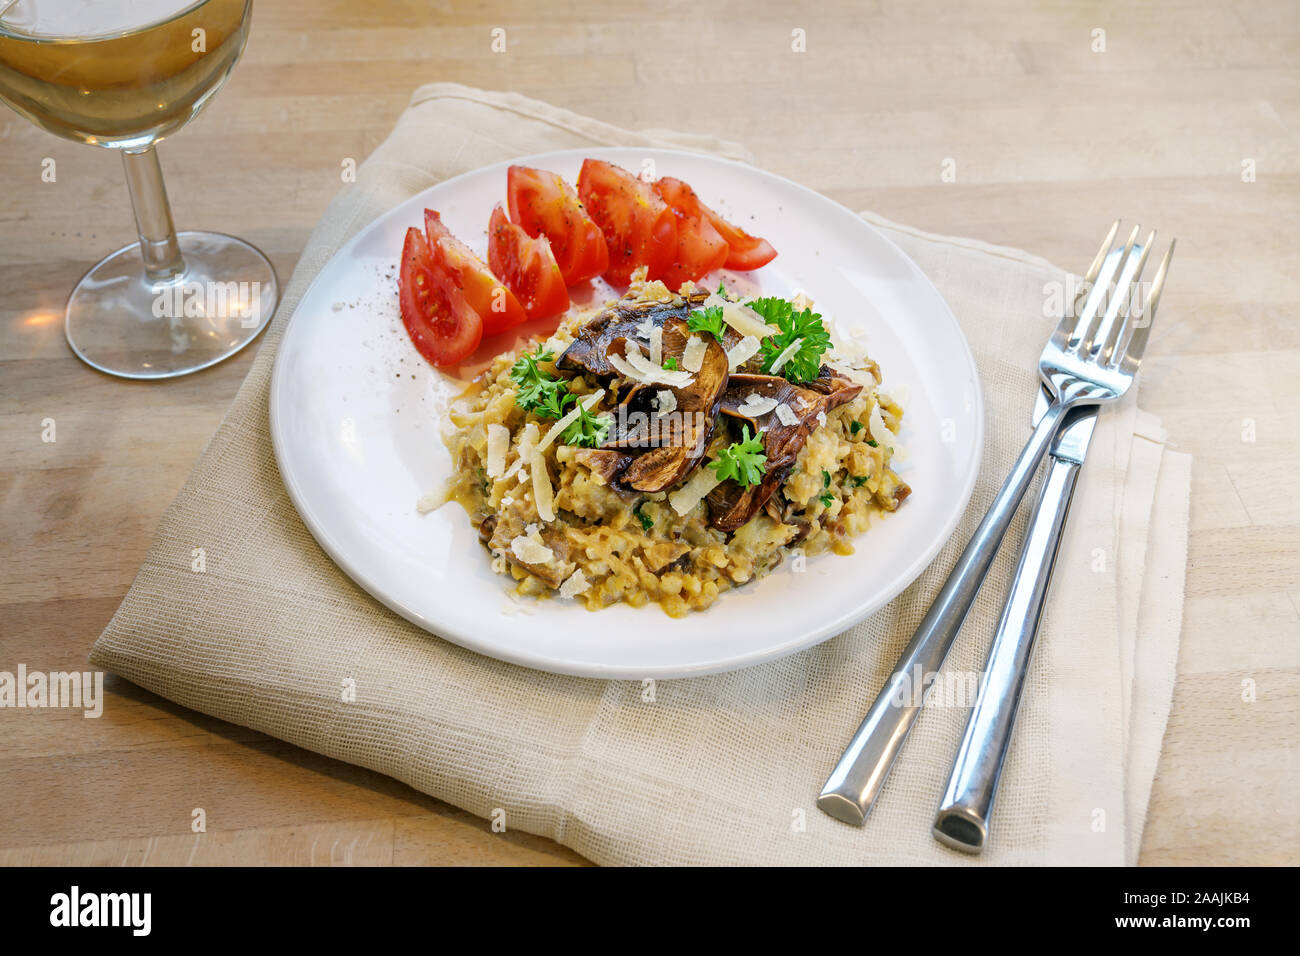 low carb diet meal, risotto made from cauliflower with dried porcini mushrooms, garnished with parsley and parmesan cheese on a plate on a wooden tabl Stock Photo